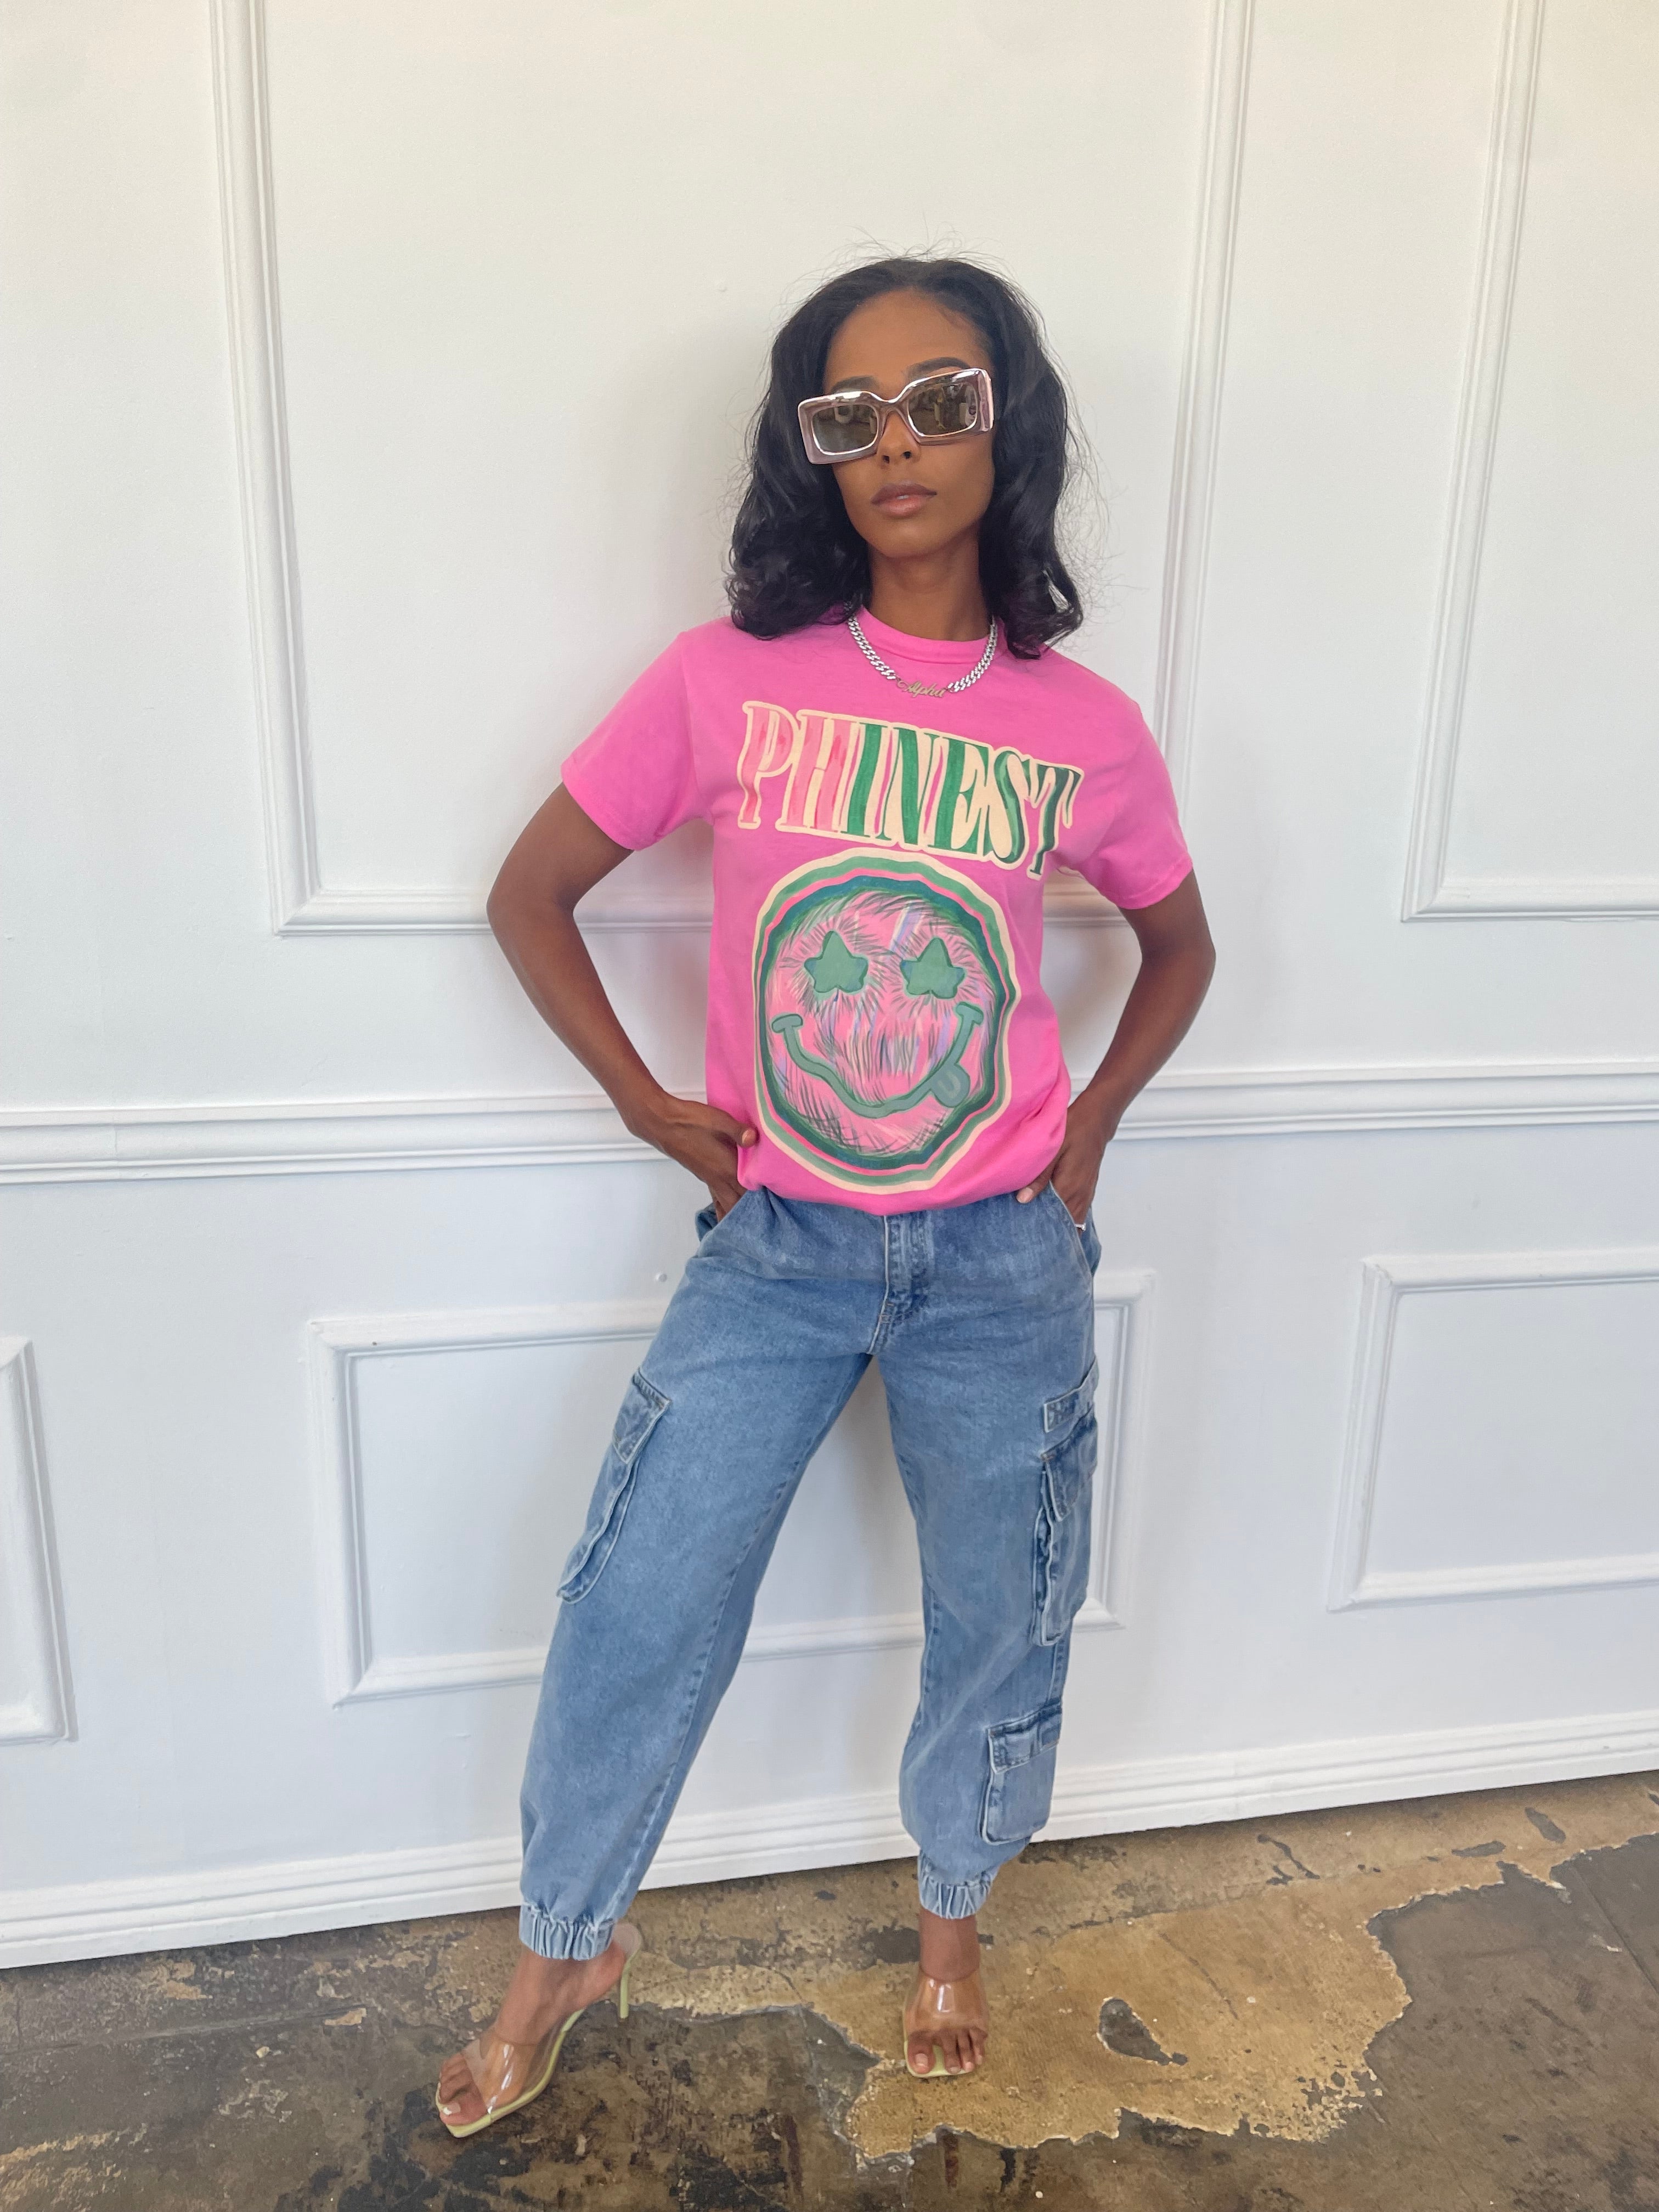 Phinest Smiley Tee in Pink